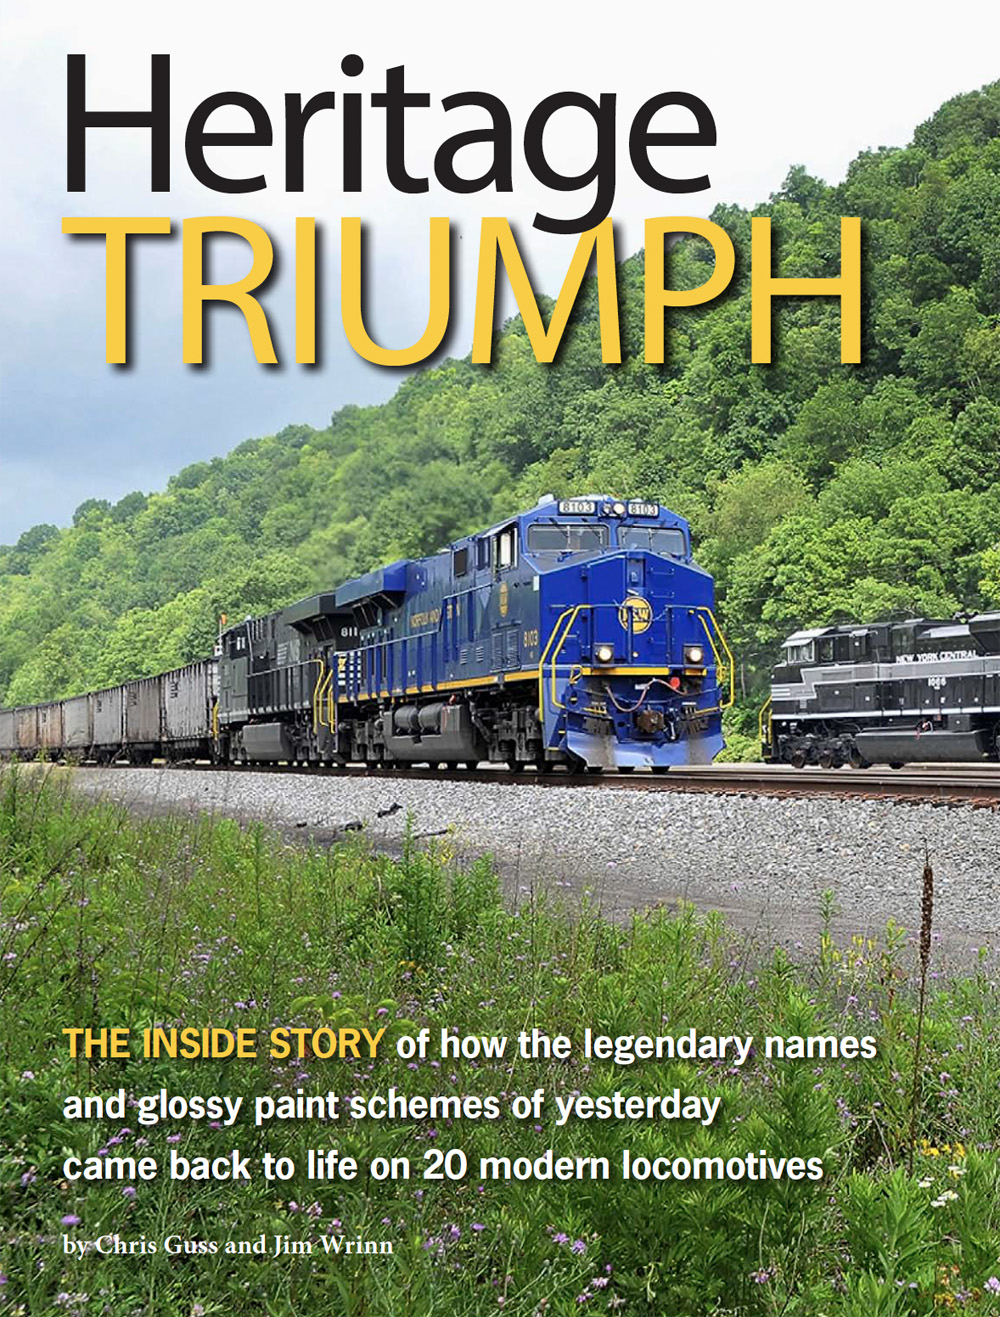 cover of pdf with blue locomotive